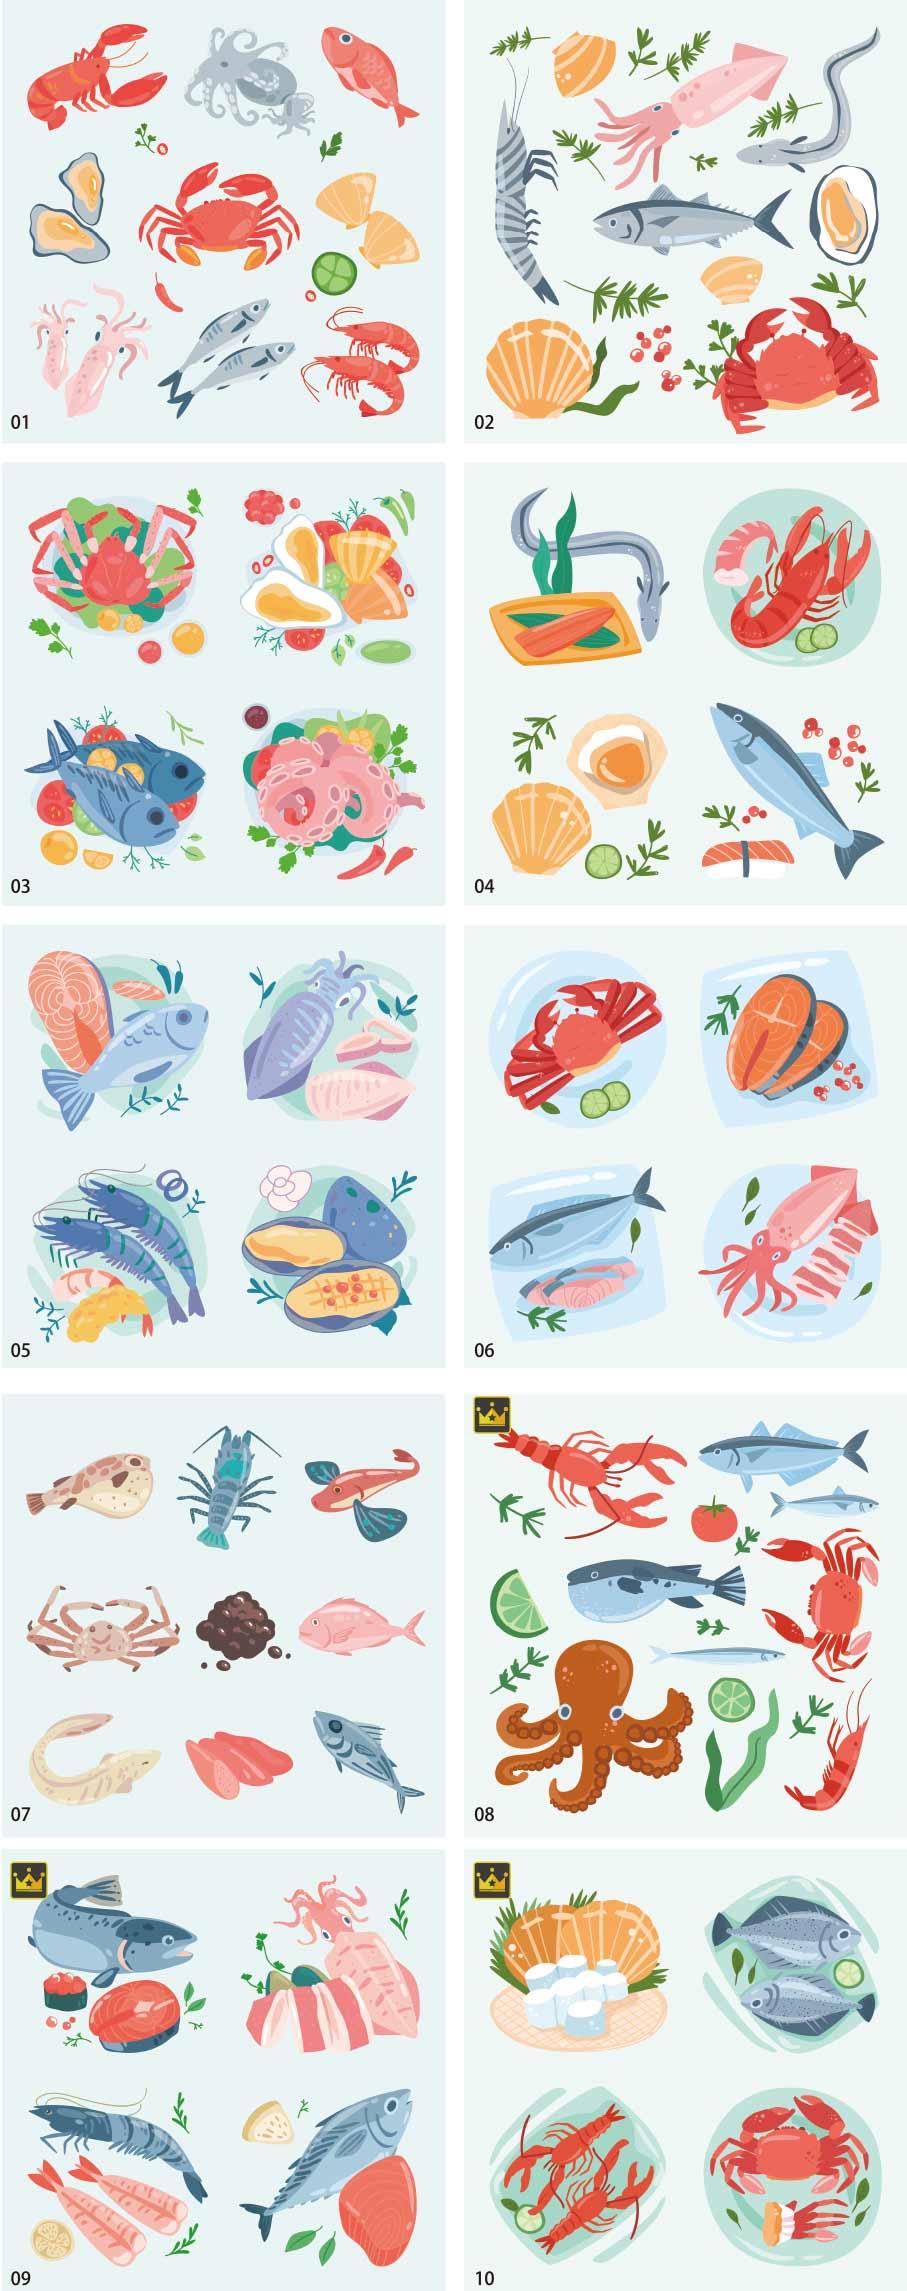 Seafood illustration collection